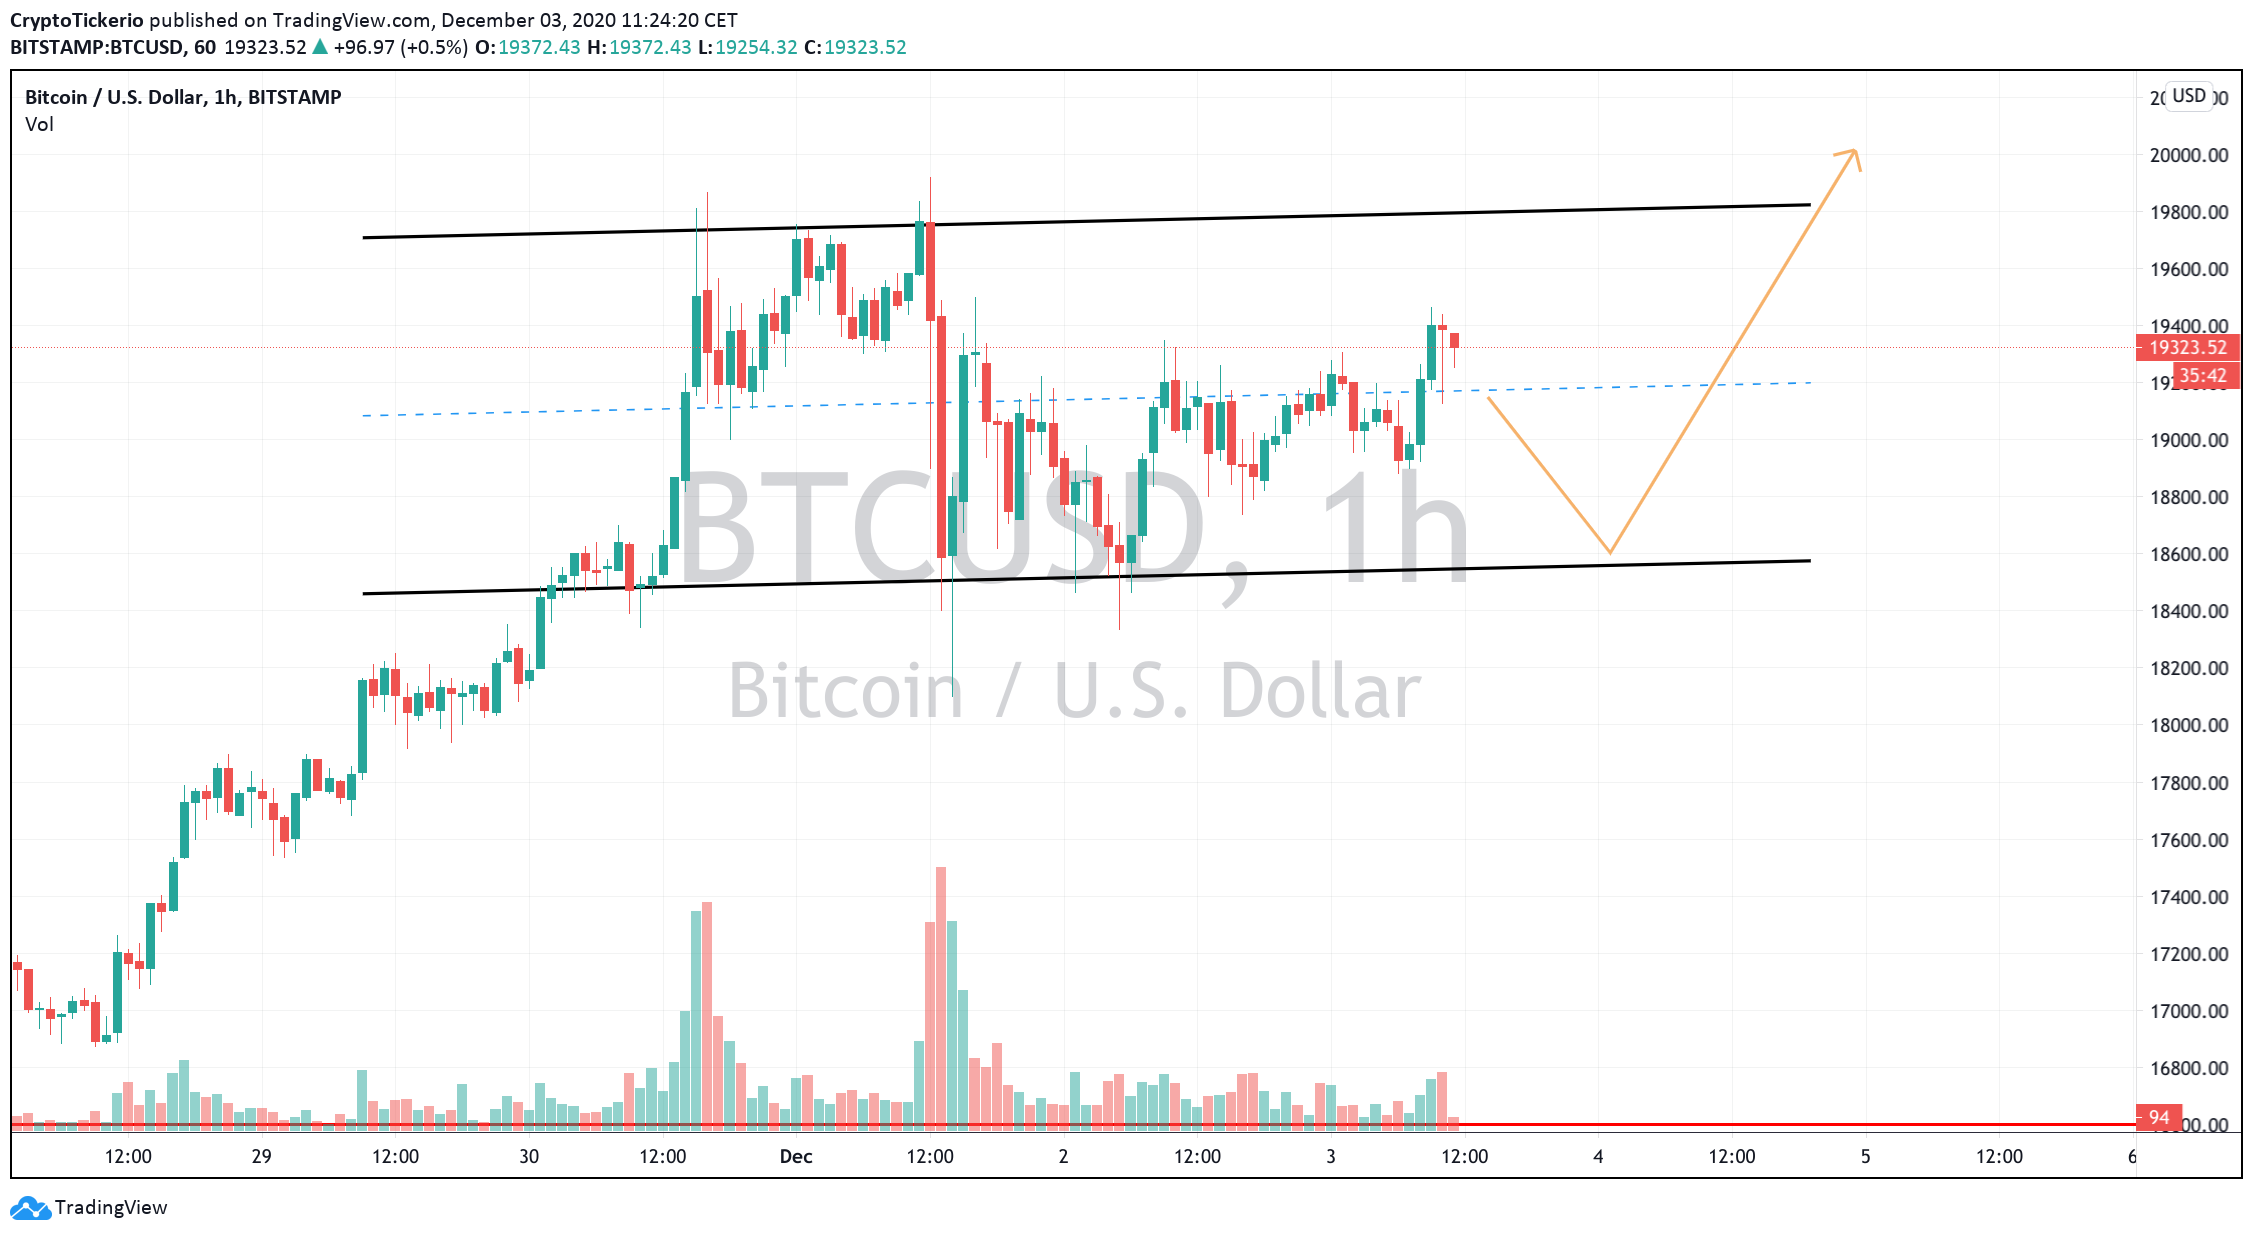 BTC/USD 1-Hour chart showing the price squeeze at ATH